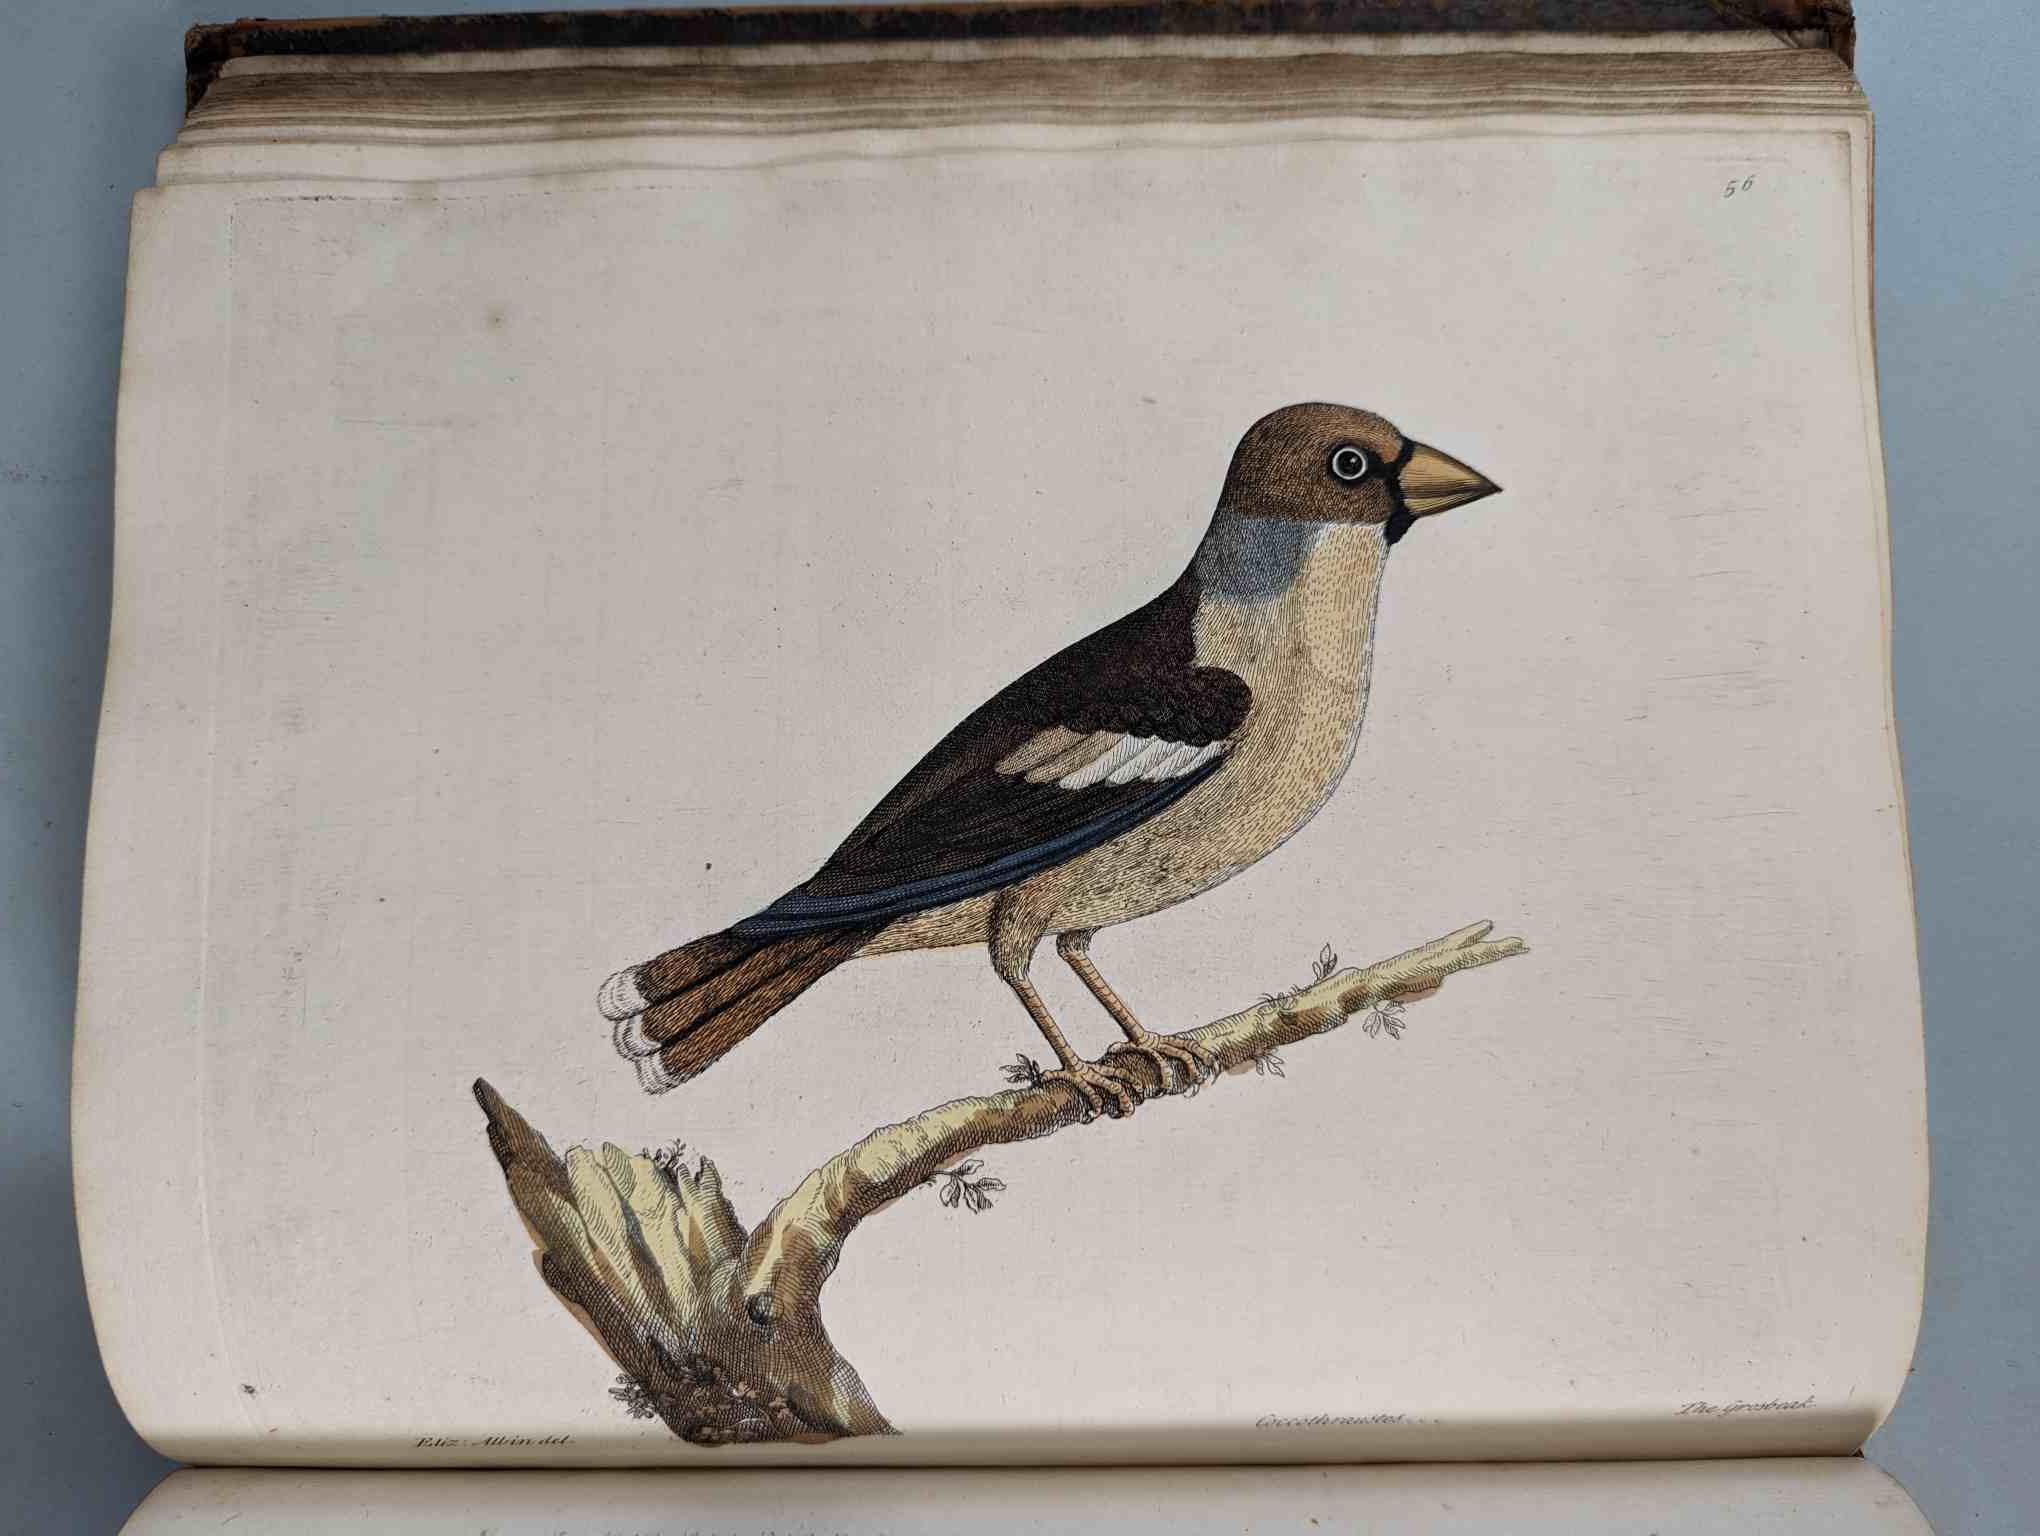 ALBIN, Eleazar. A Natural History of Birds, to which are added, Notes and Observations by W. - Image 59 of 208